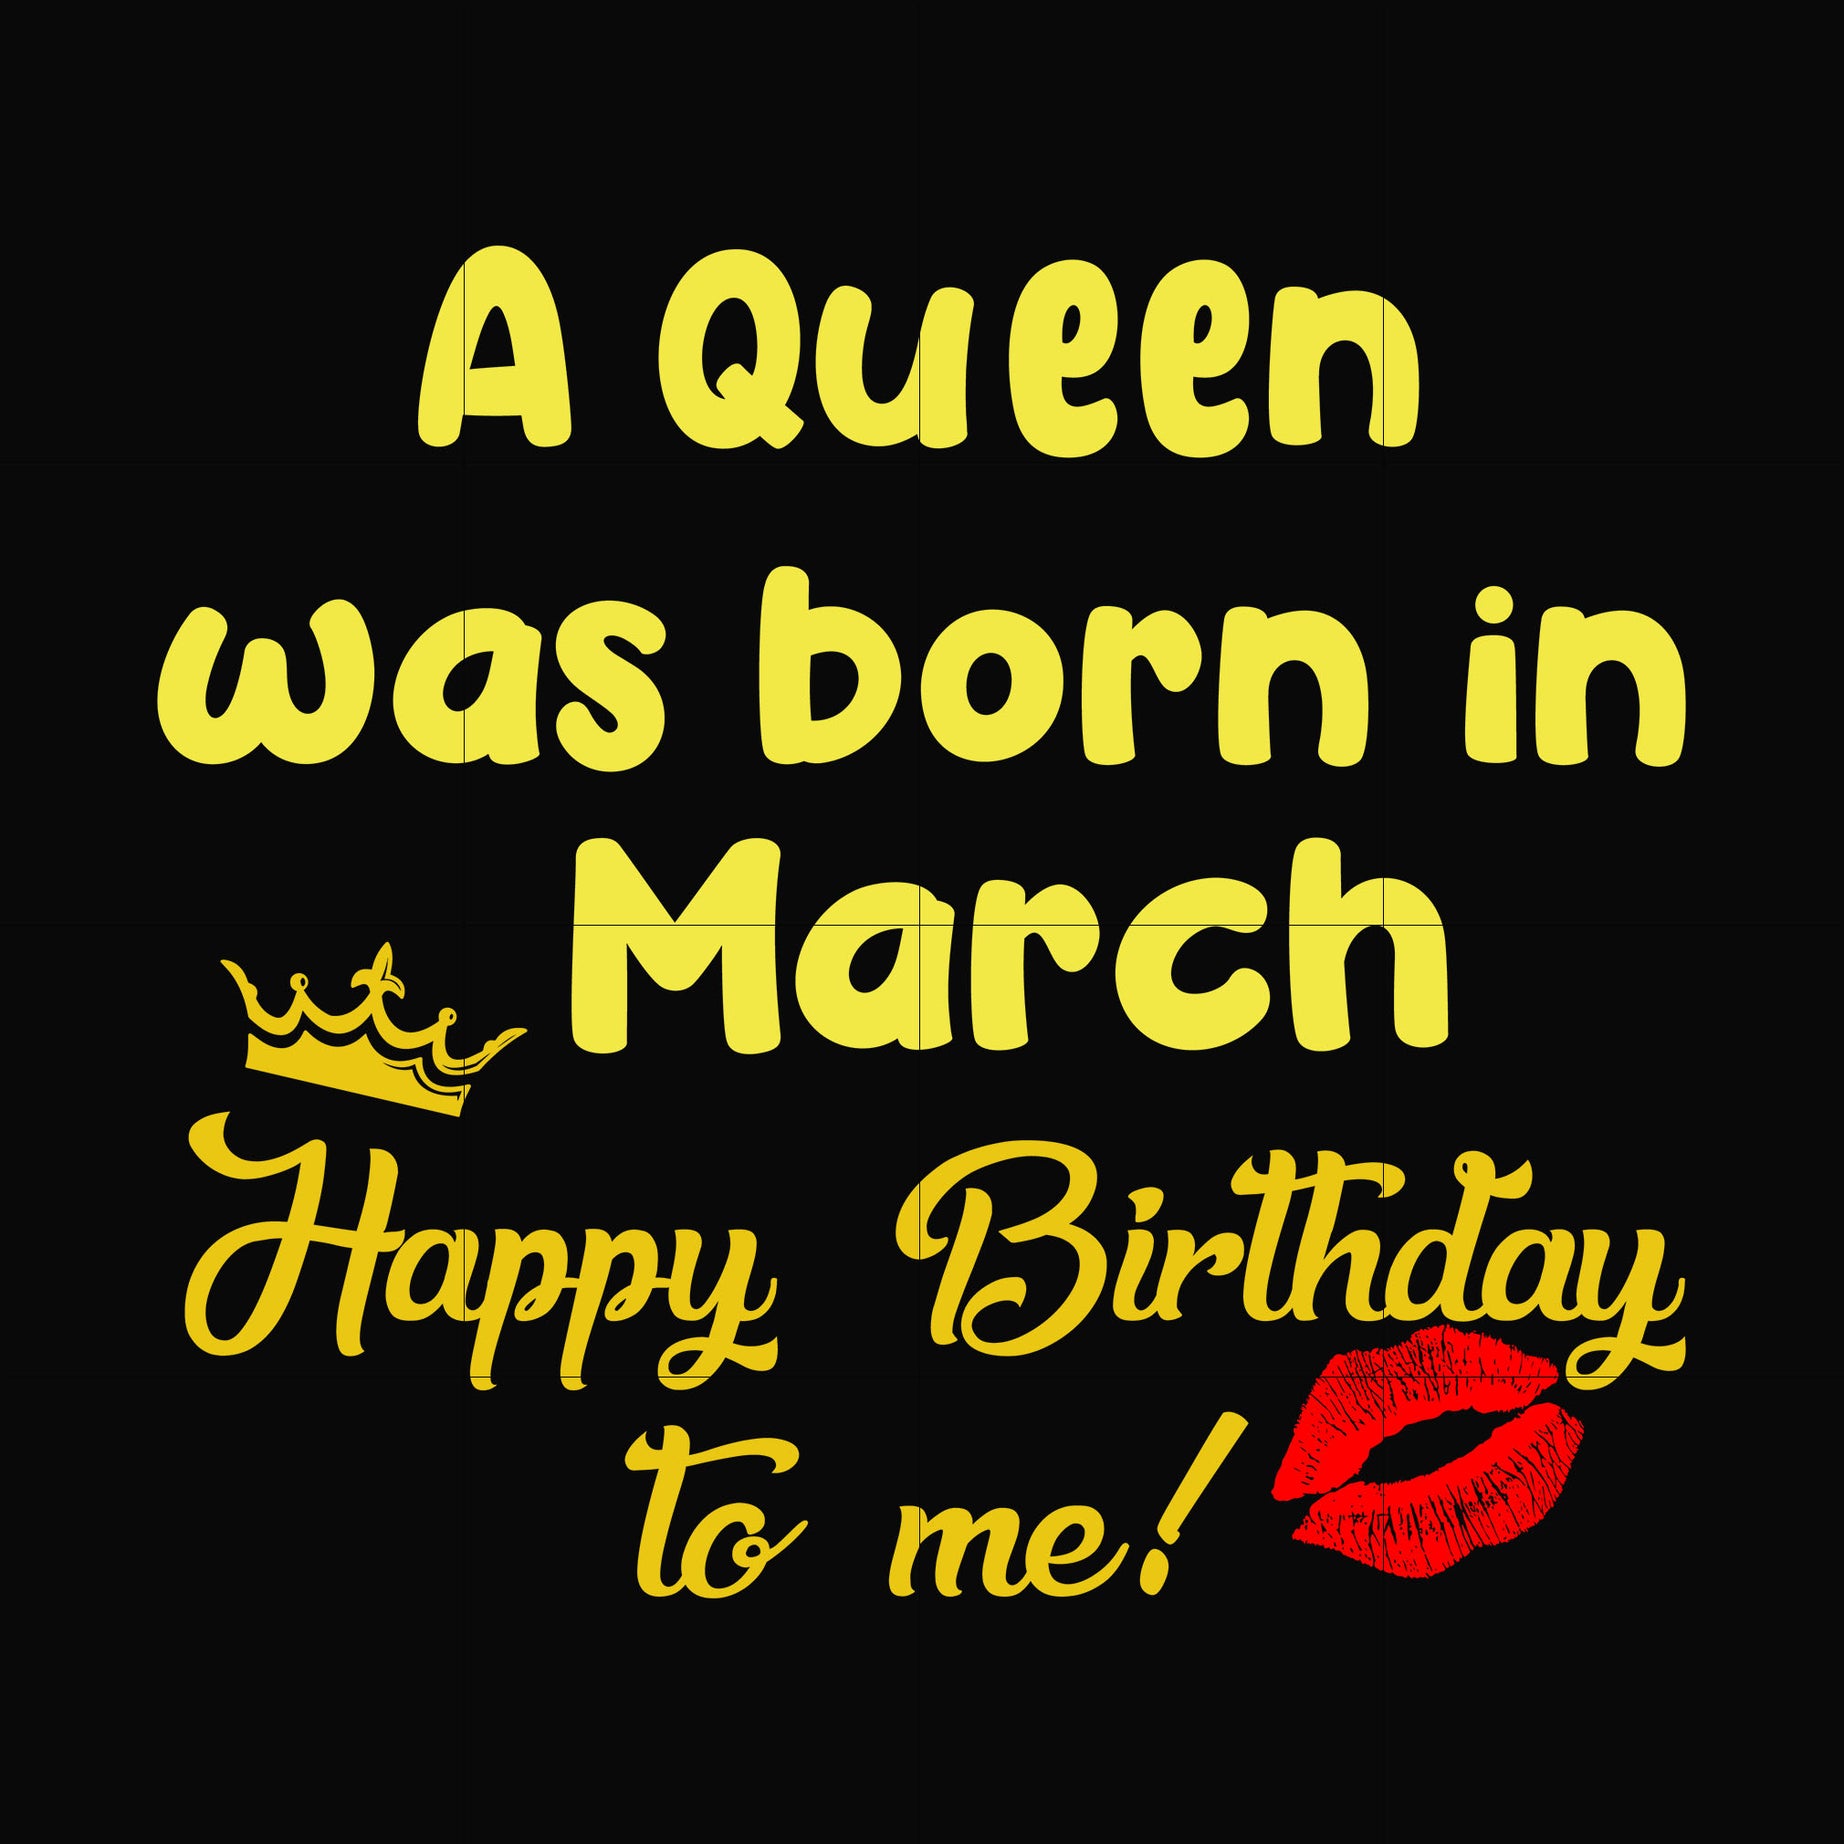 A queen was born in March happy birthday to me svg, png, dxf, eps digital file BD0063